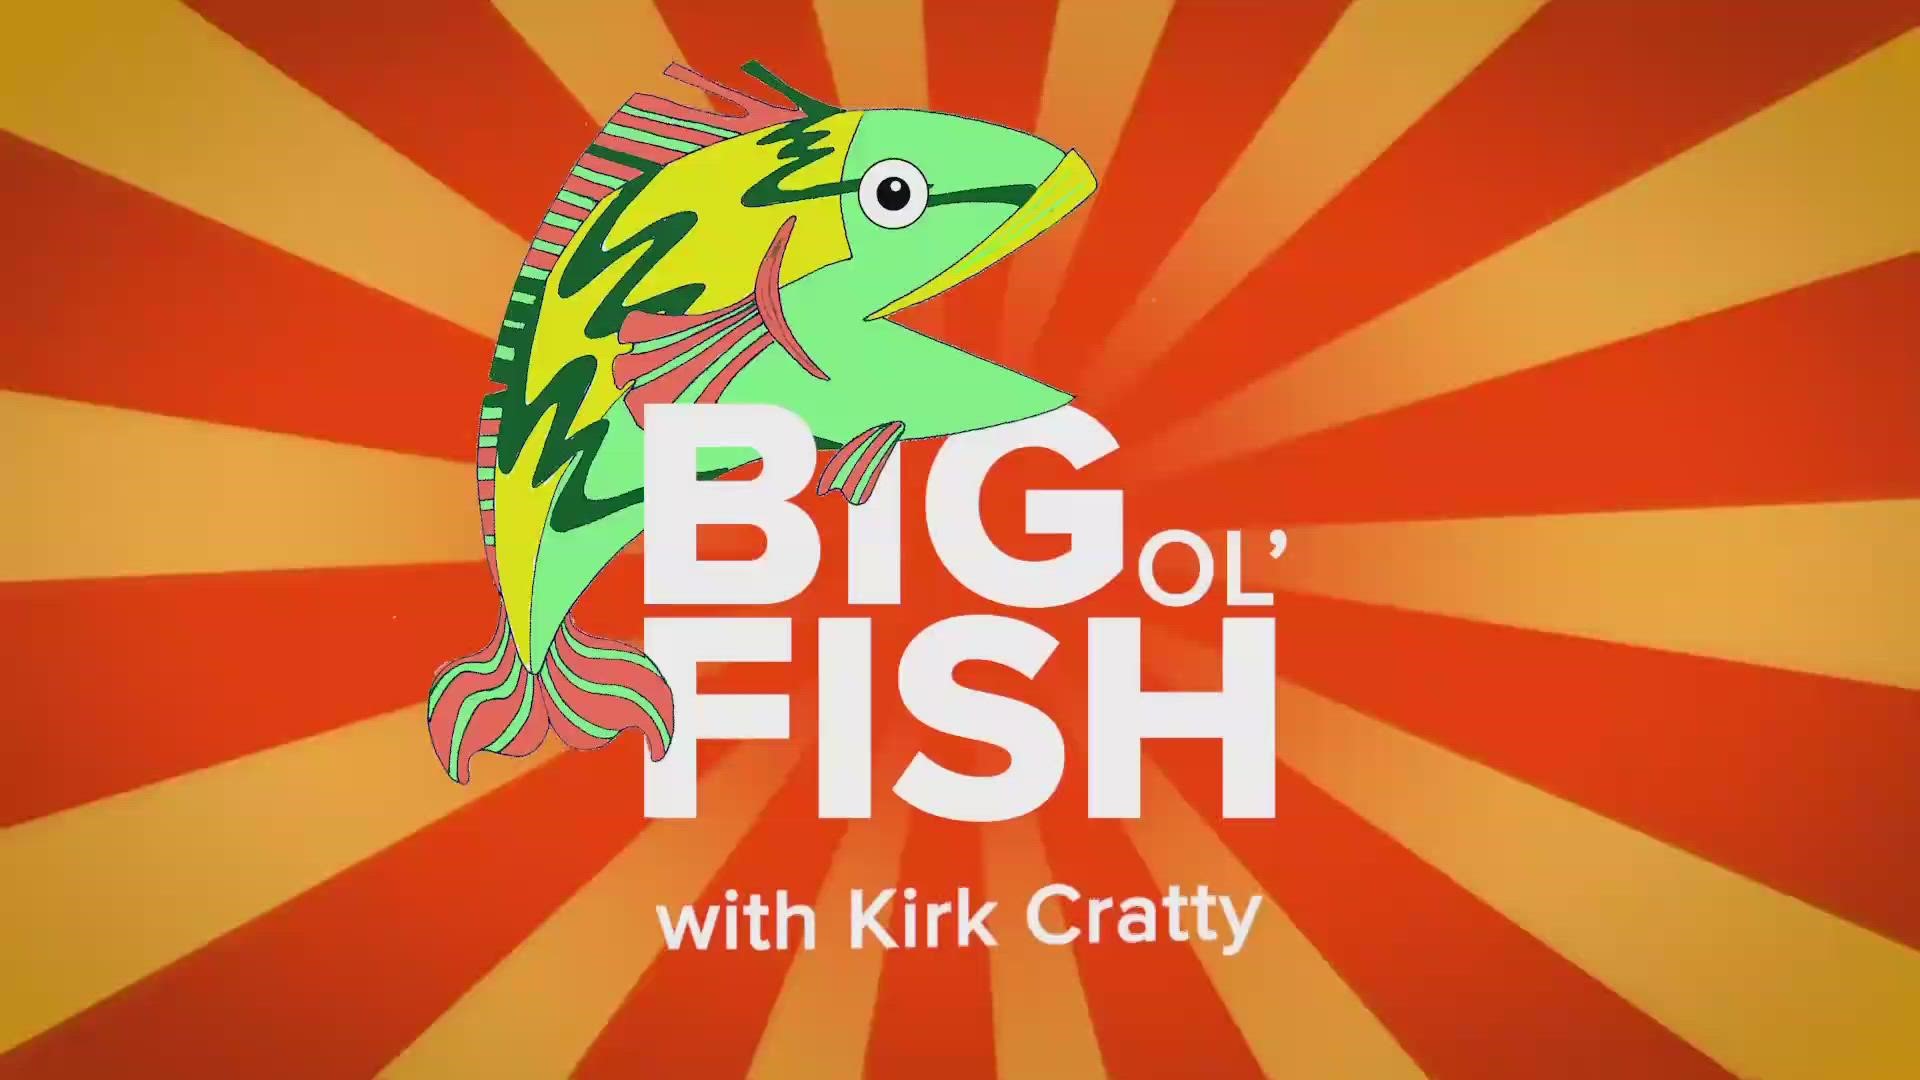 It's the Big Ol' Fish show with Kirk Cratty on Sunday, May 21, 2023.